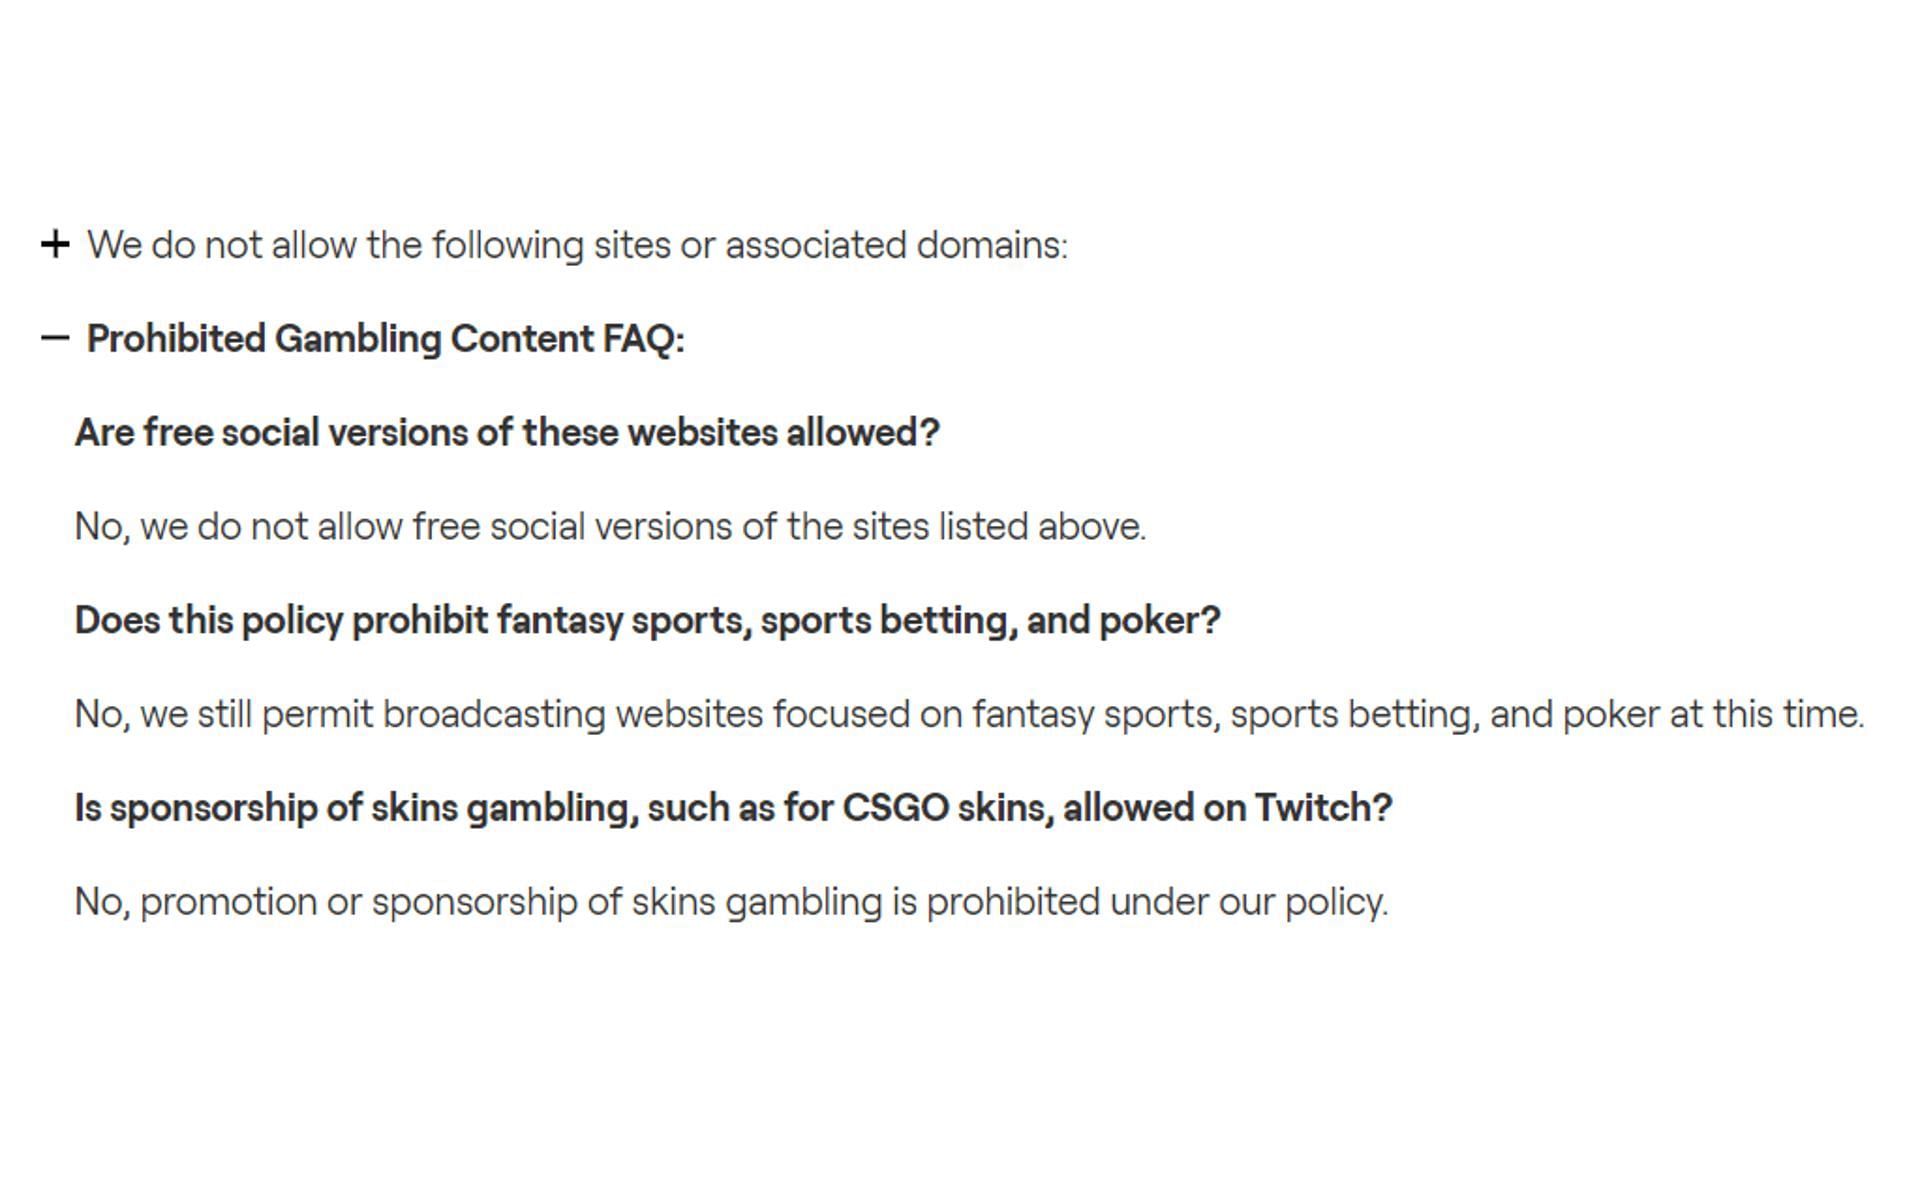 Image via Twitch Community Guidelines